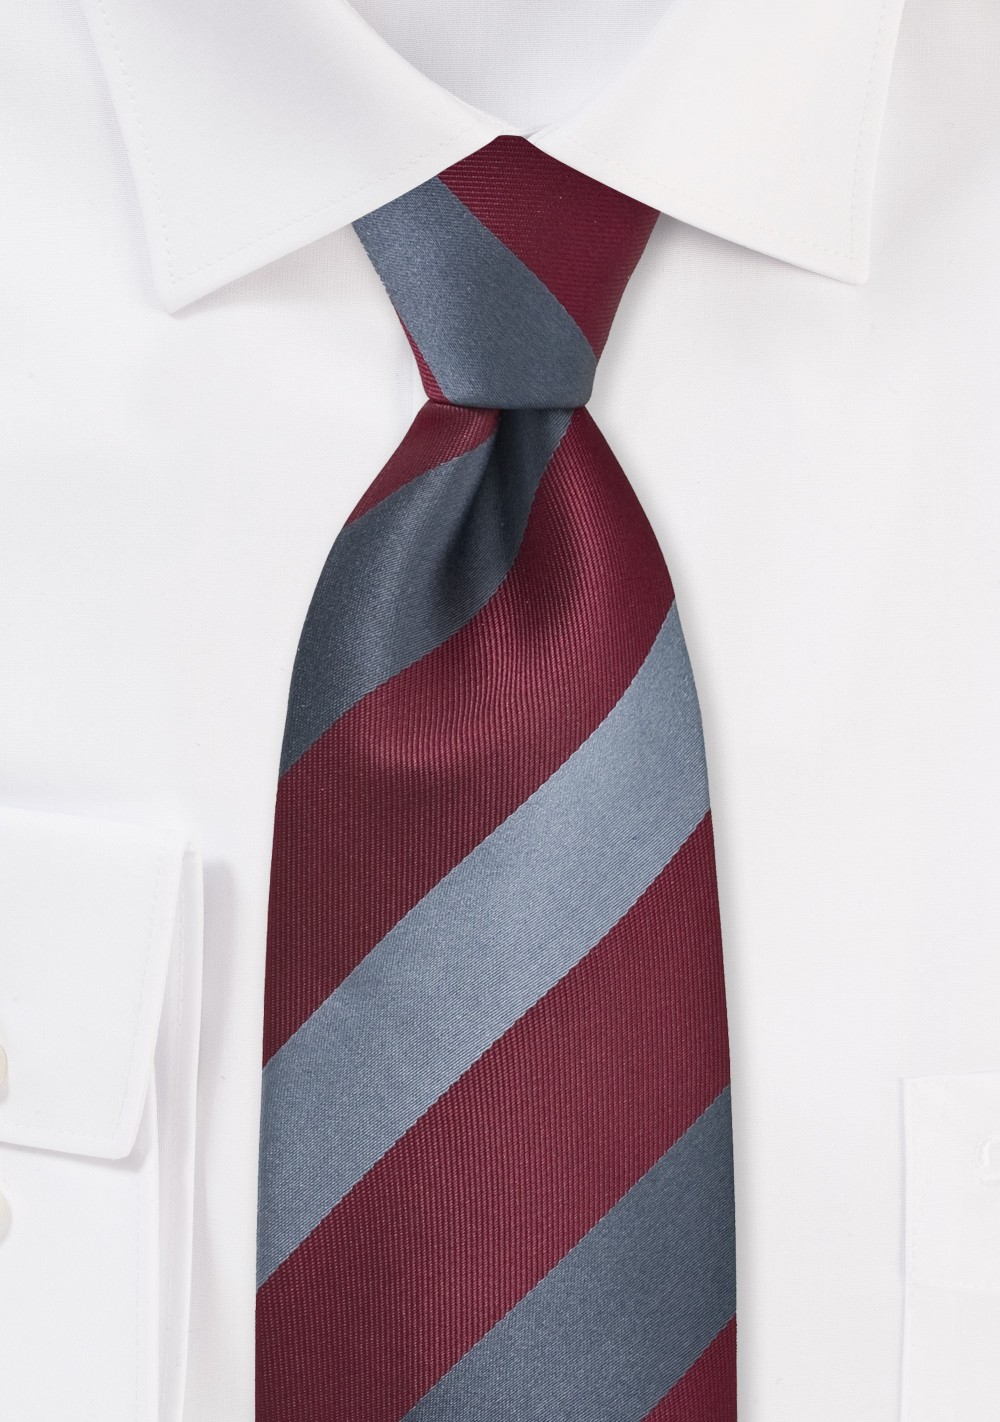 Bordeaux Red and Gray Striped Tie